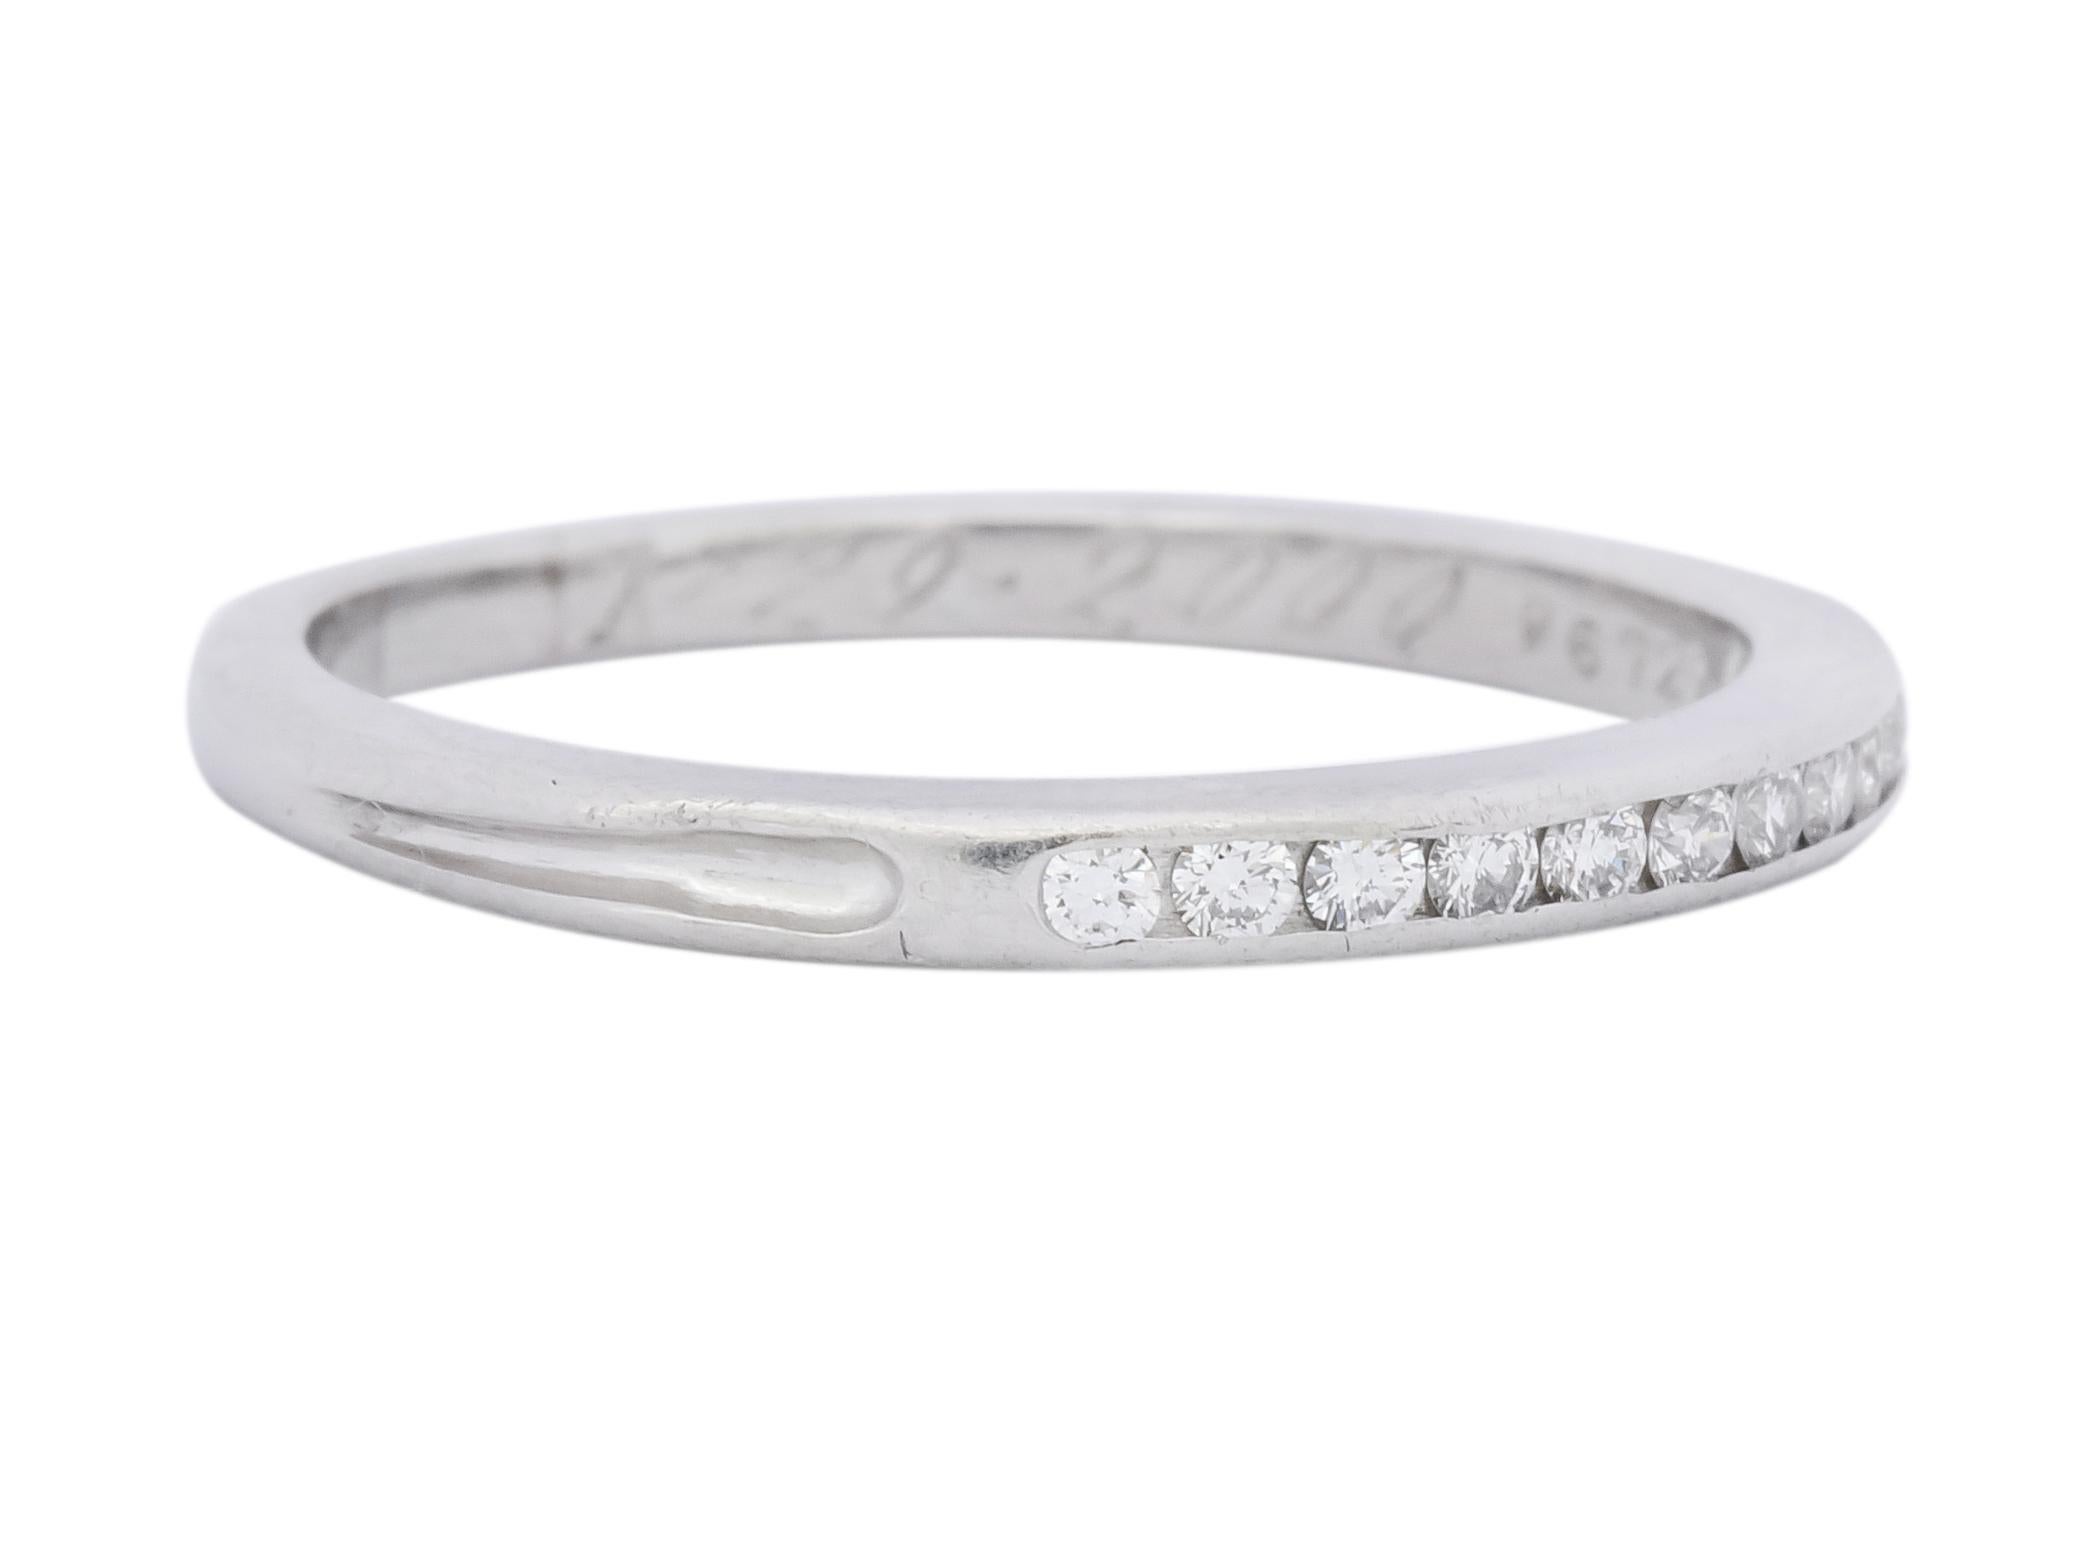 Round brilliant cut diamonds, channel set to front, weighing approximately 0.22 carat total, E/F color and VS clarity

Accented by deeply recessed grooves on each shoulder

With dated inscription circa 2000

Fully signed Tiffany & Co. and